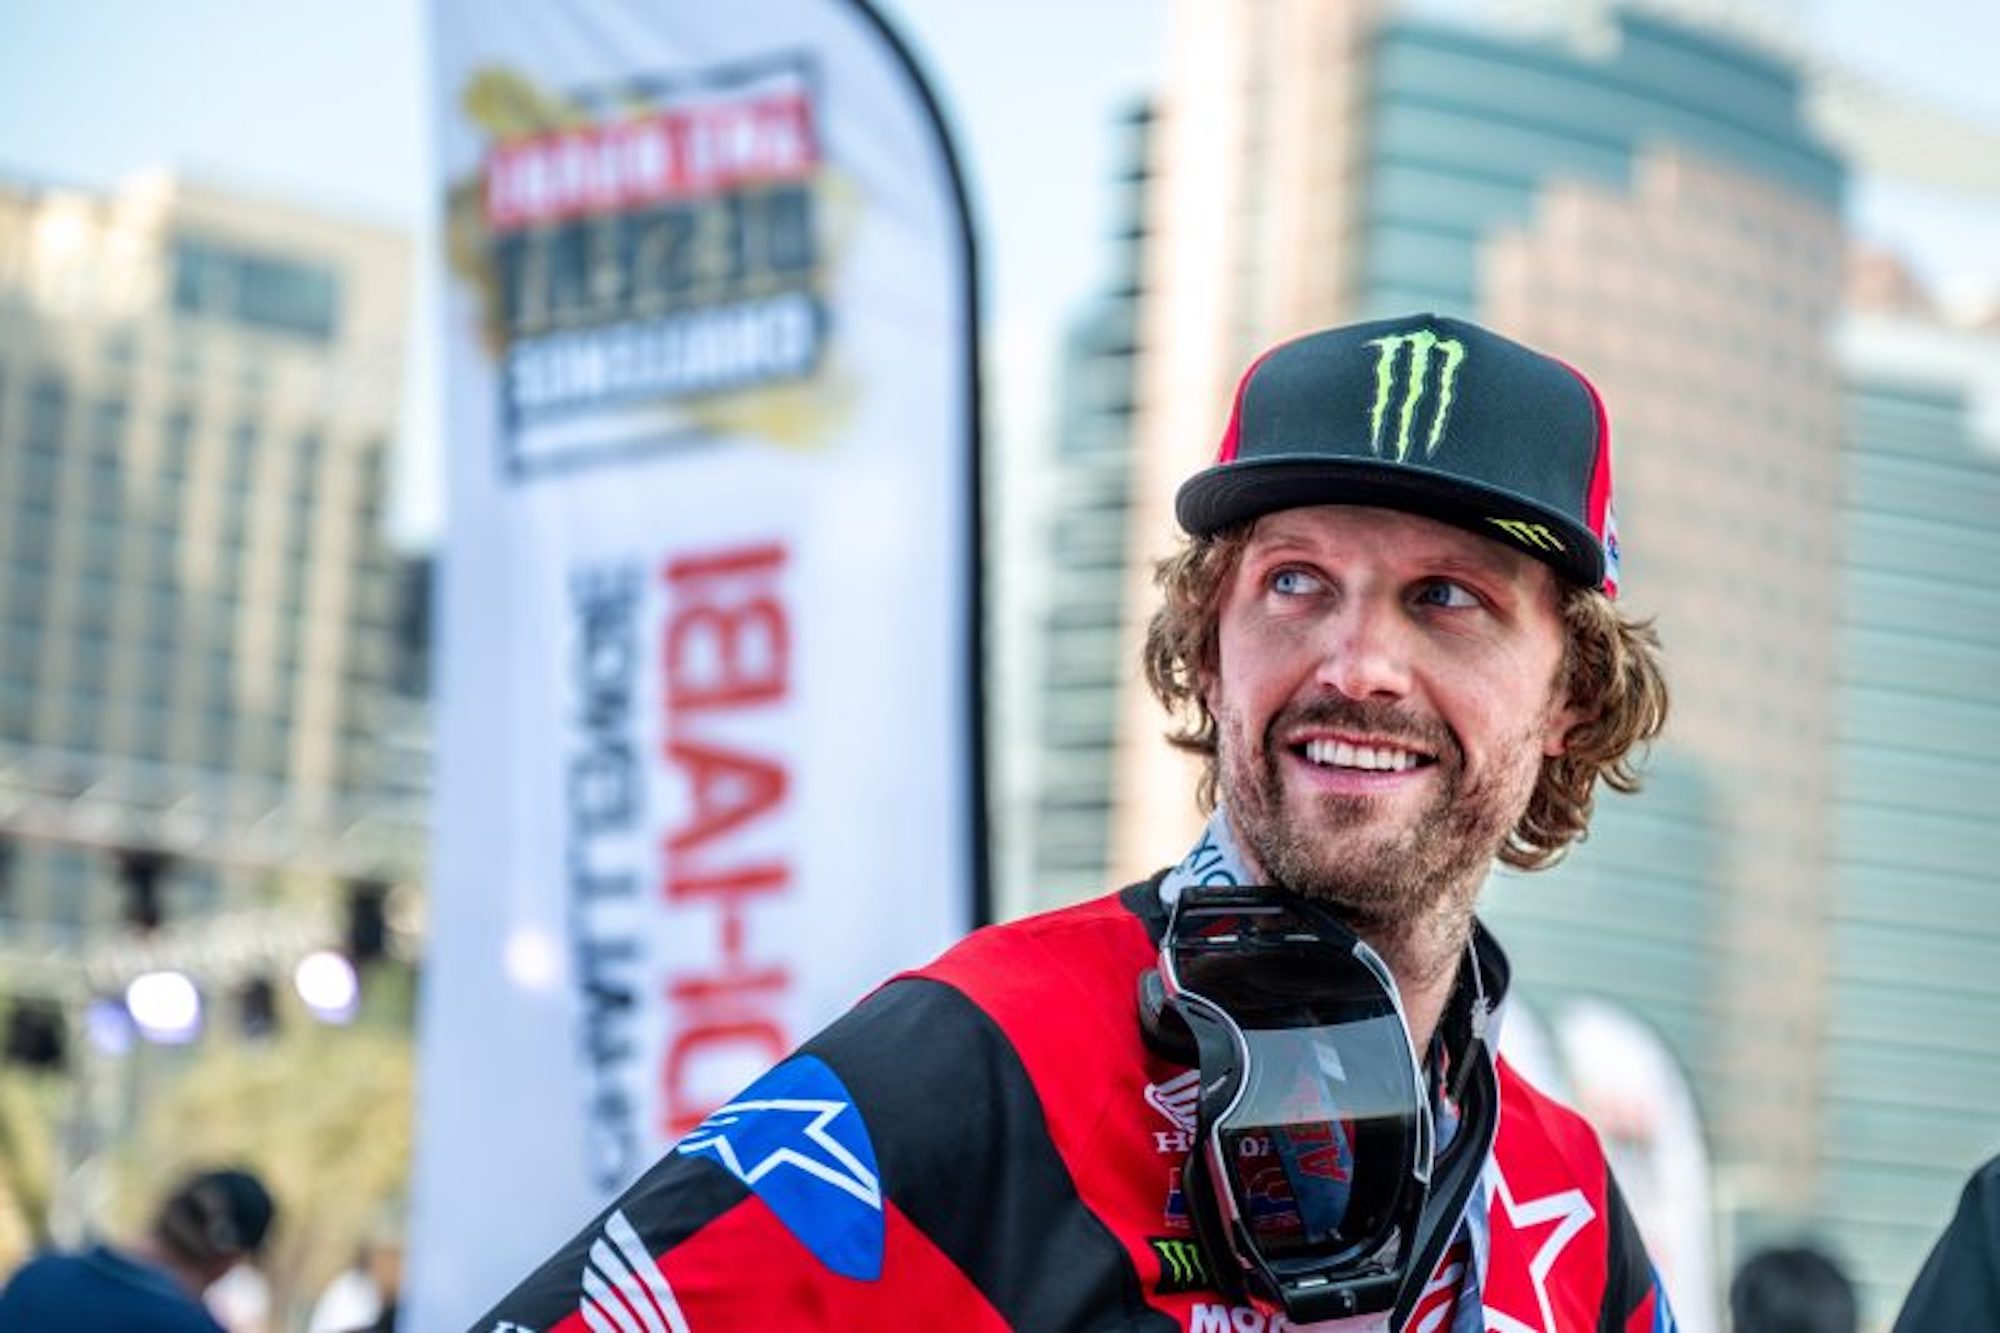 A view of Adrien Van Beveren, who won the Abu Dhabi Desert Challenge. Media sourced from a recent press release from Monster Energy Honda.  